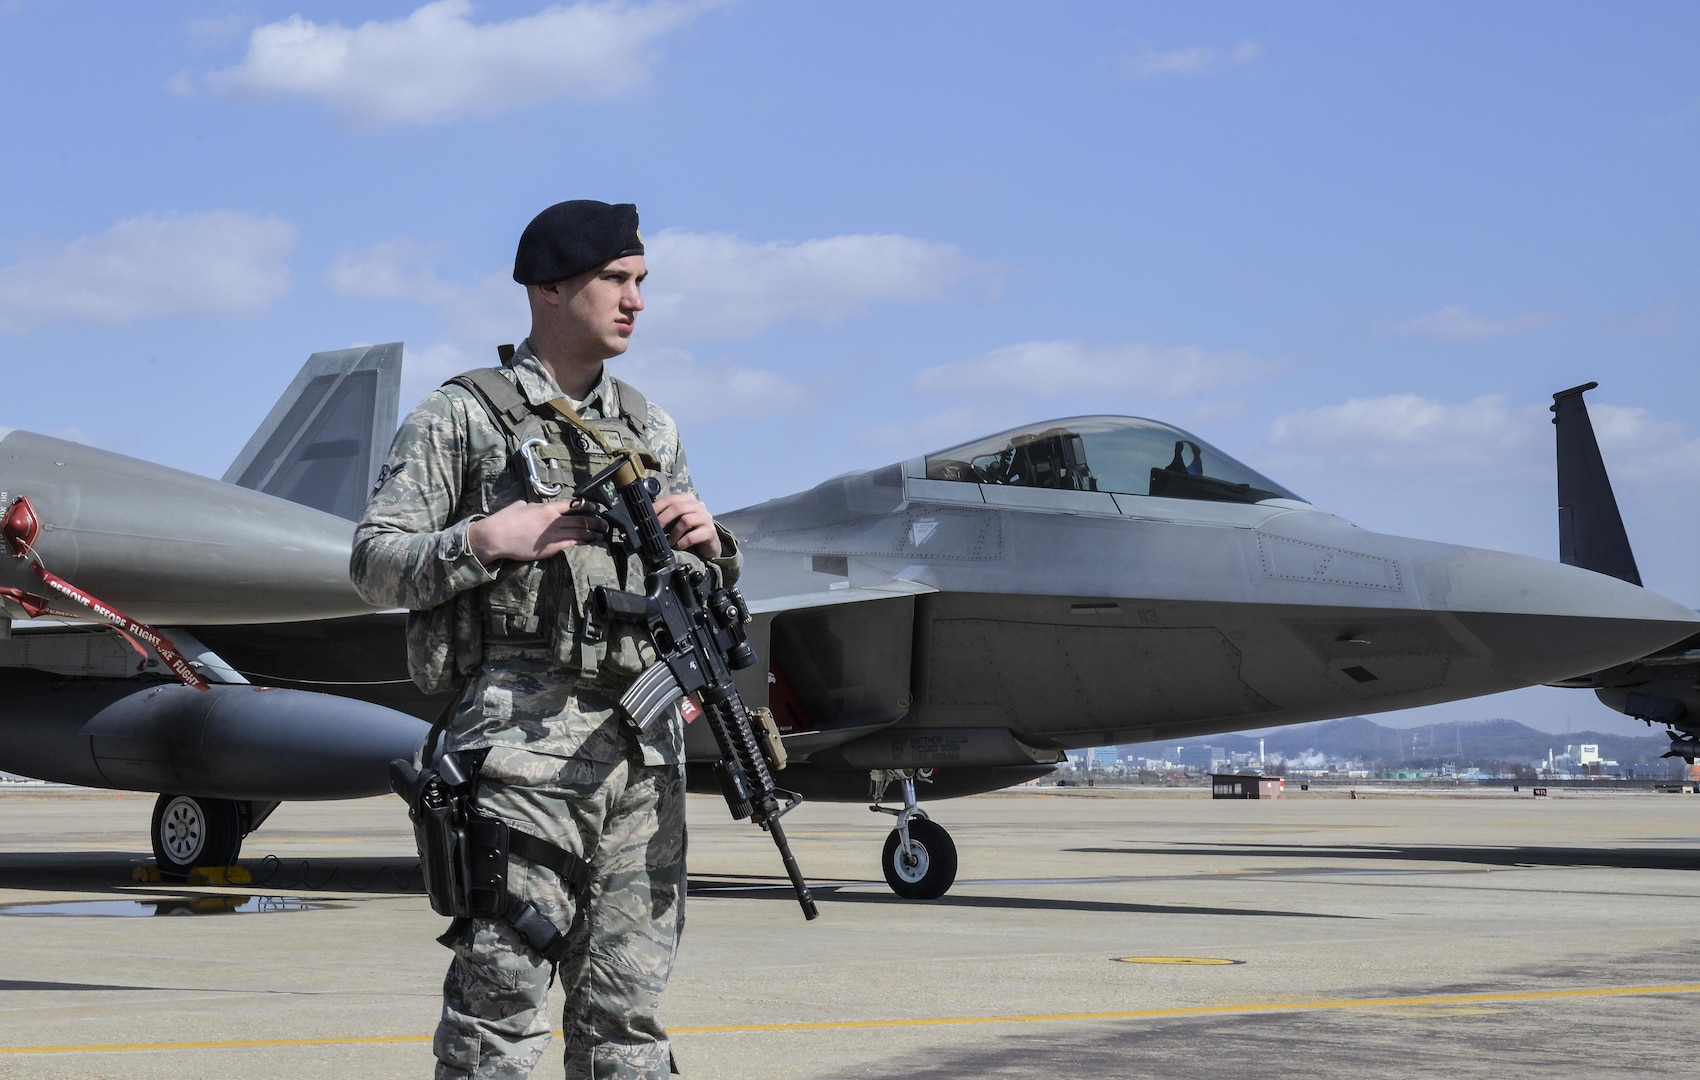 An Air Force Security Forces member stands guard next to an F22 Raptor fighter aircraft from Kadena Air Base, Japan, after it conducted a flyover in the vicinity of Osan Air Base, South Korea, in response to recent provocative action by North Korea Feb. 17, 2016. It was joined by three other Raptors, four F-15 Slam Eagles and four U.S. Air Force F-16 Fighting Falcons. The F-22 is designed to project air dominance rapidly and at great distances and currently cannot be matched by any known or projected fighter aircraft.  (U.S. Air Force photo by Tech. Sgt. Travis Edwards/Released)